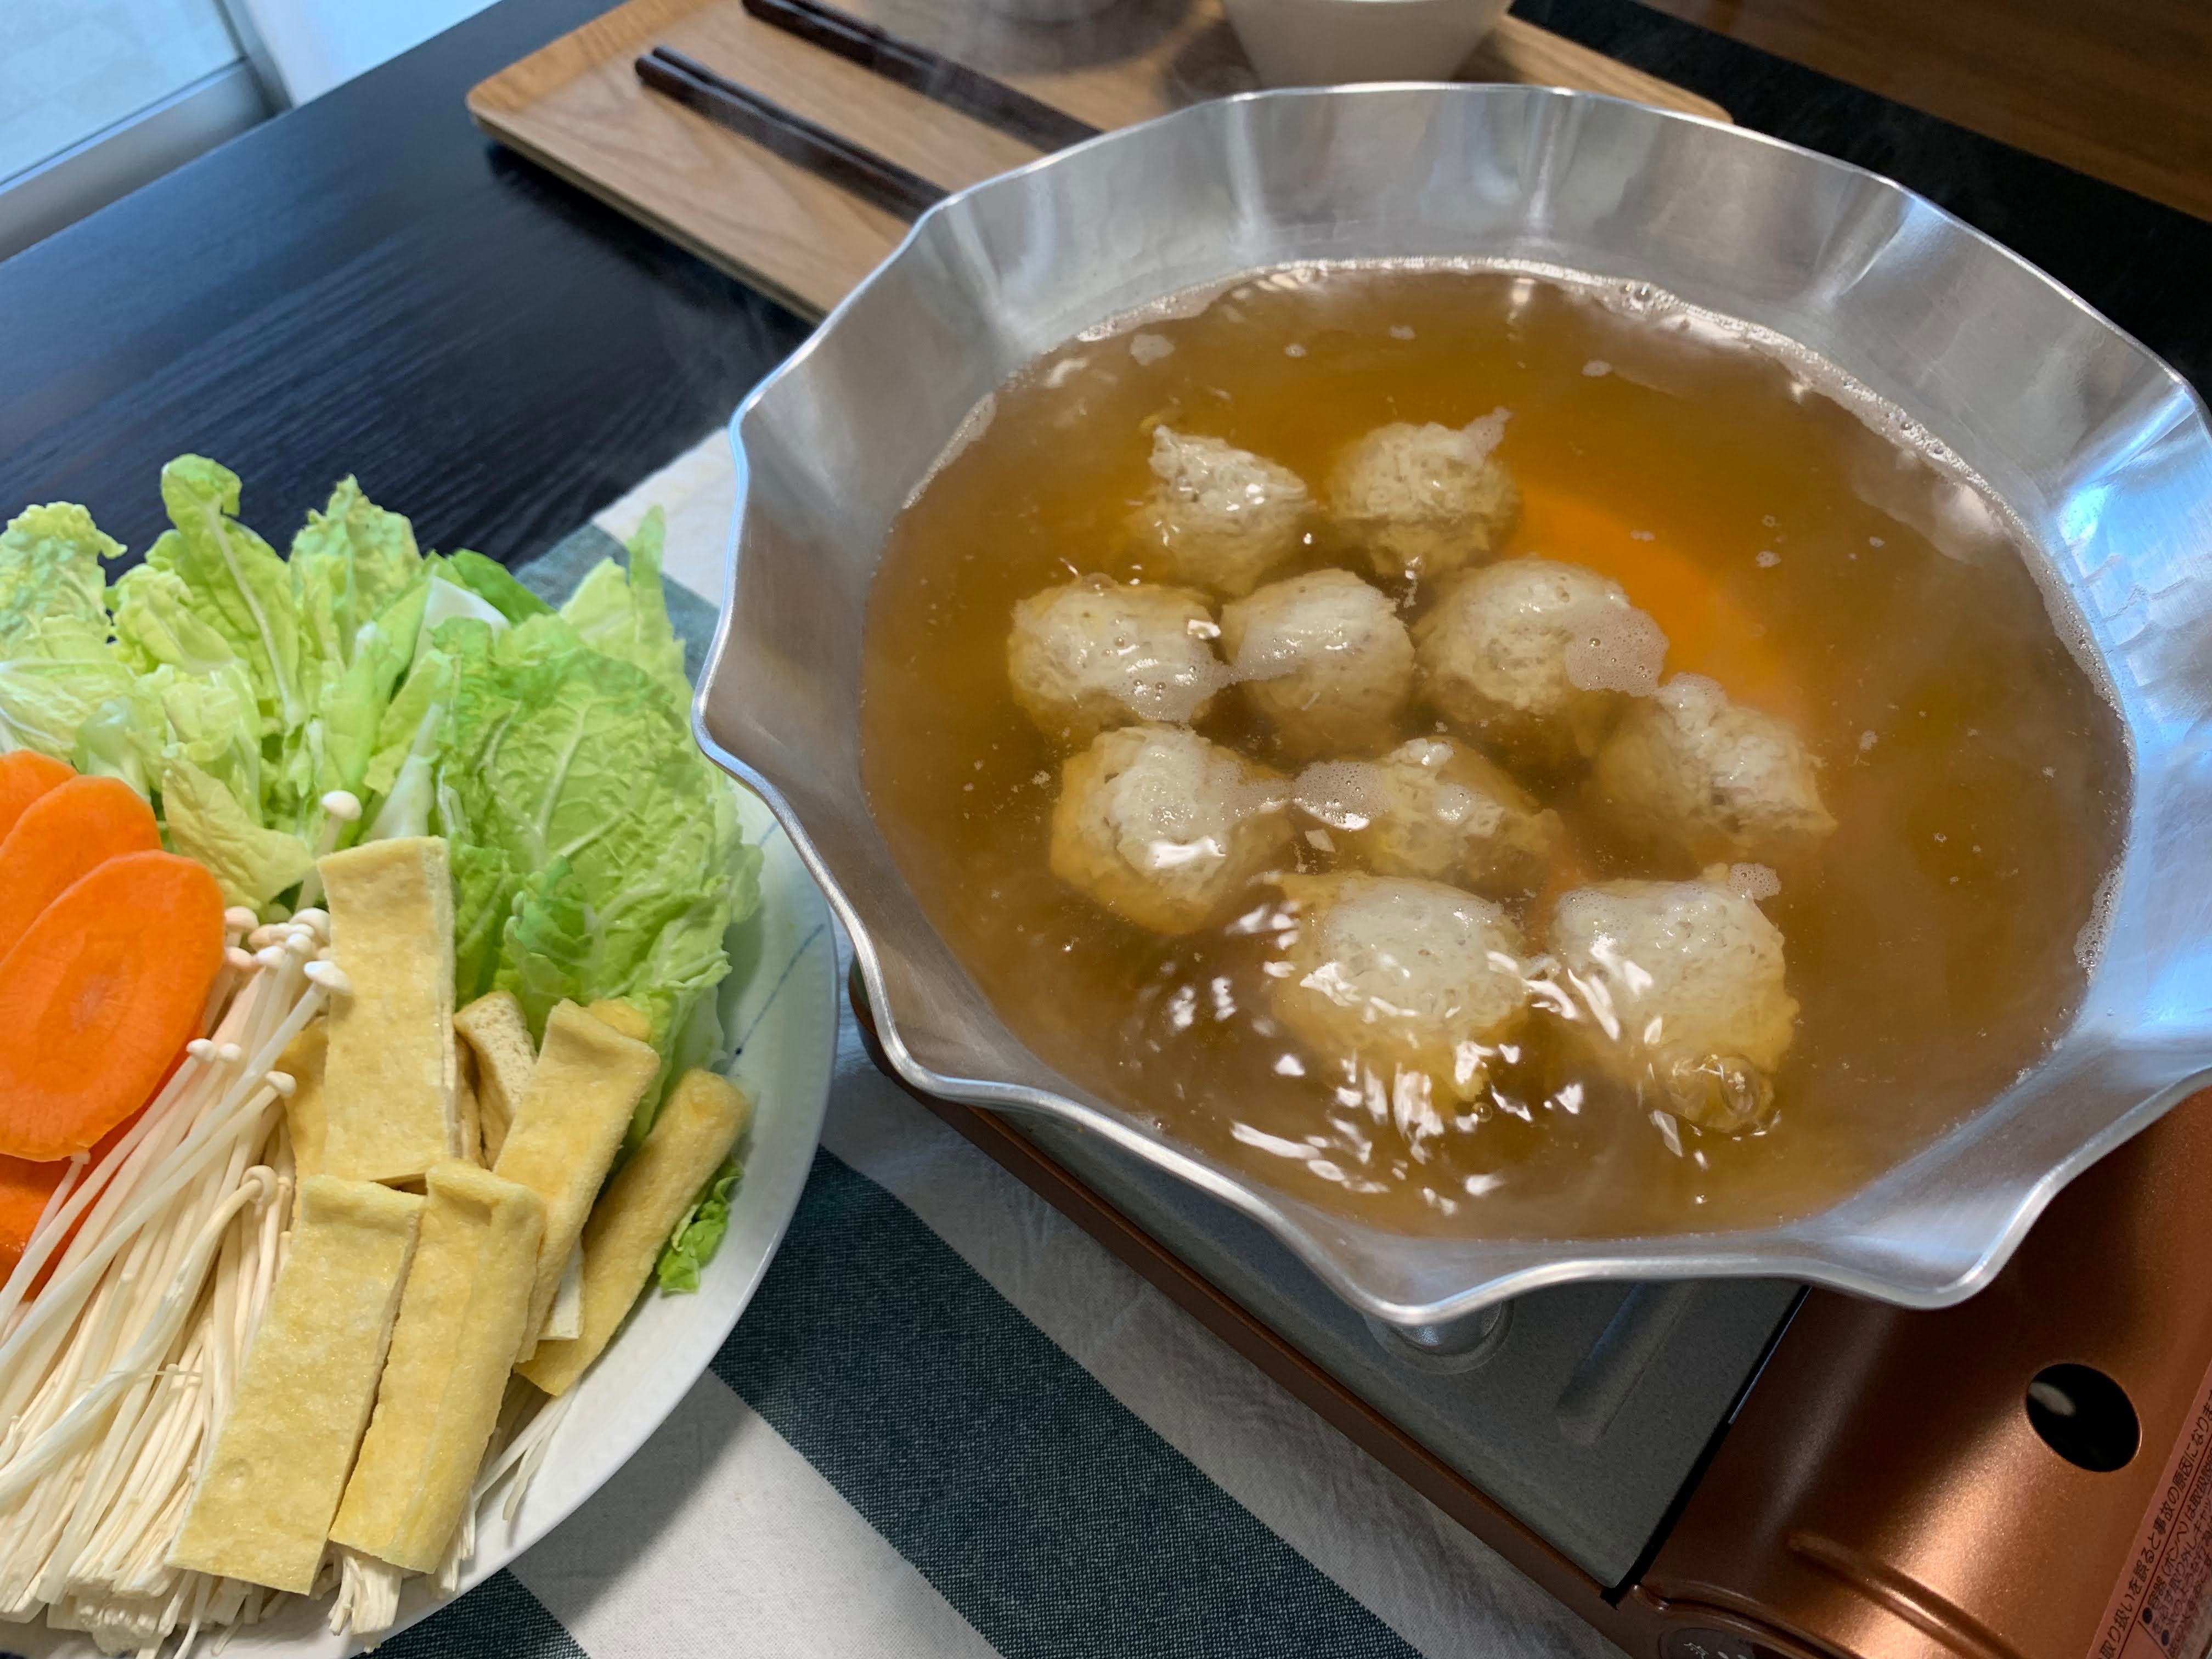 How to Make Chanko Nabe (Sumo Stew) At Home – Japanese Taste